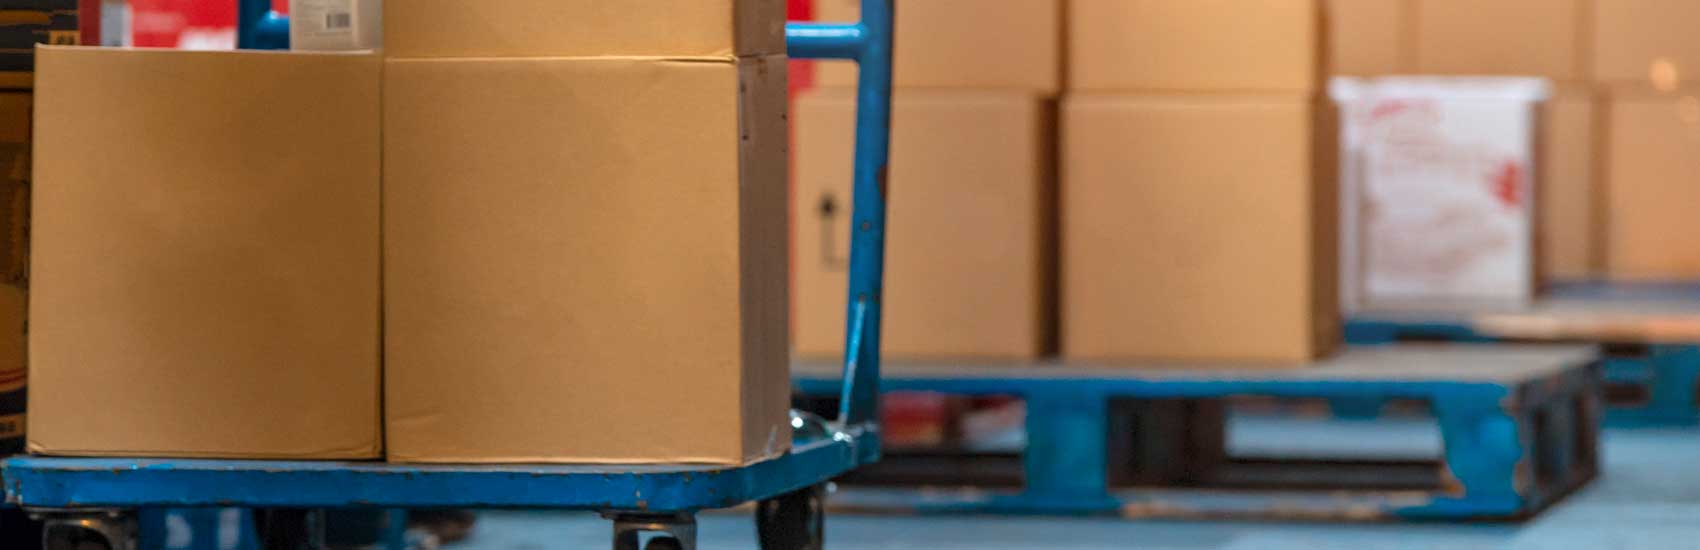 Growing Retailer Needed Immediate Help Securing Fulfillment Center